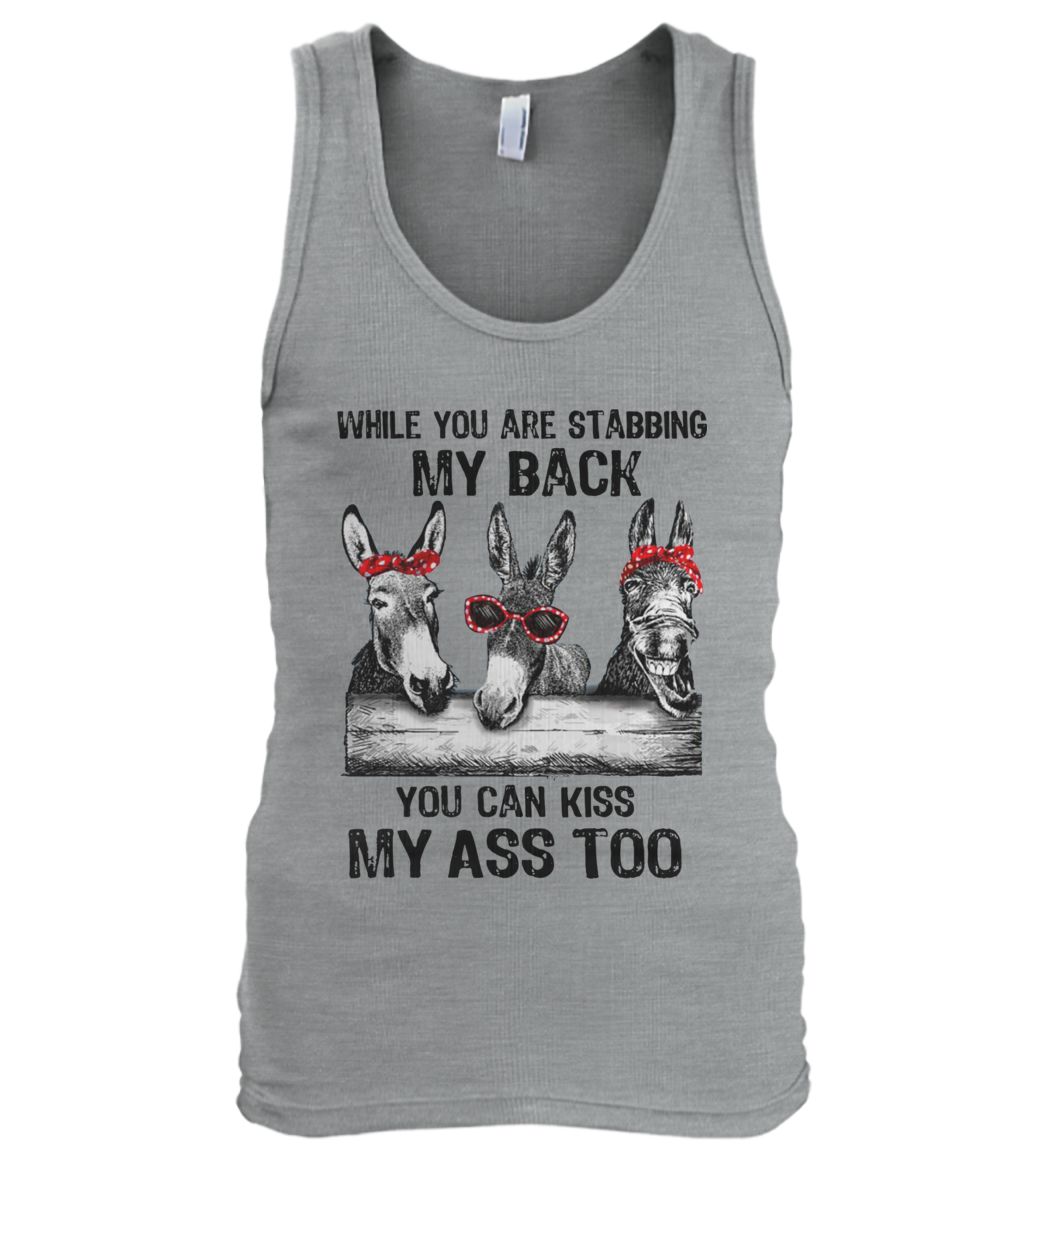 Donkey while you are stabbing my back you can kiss my ass too men's tank top